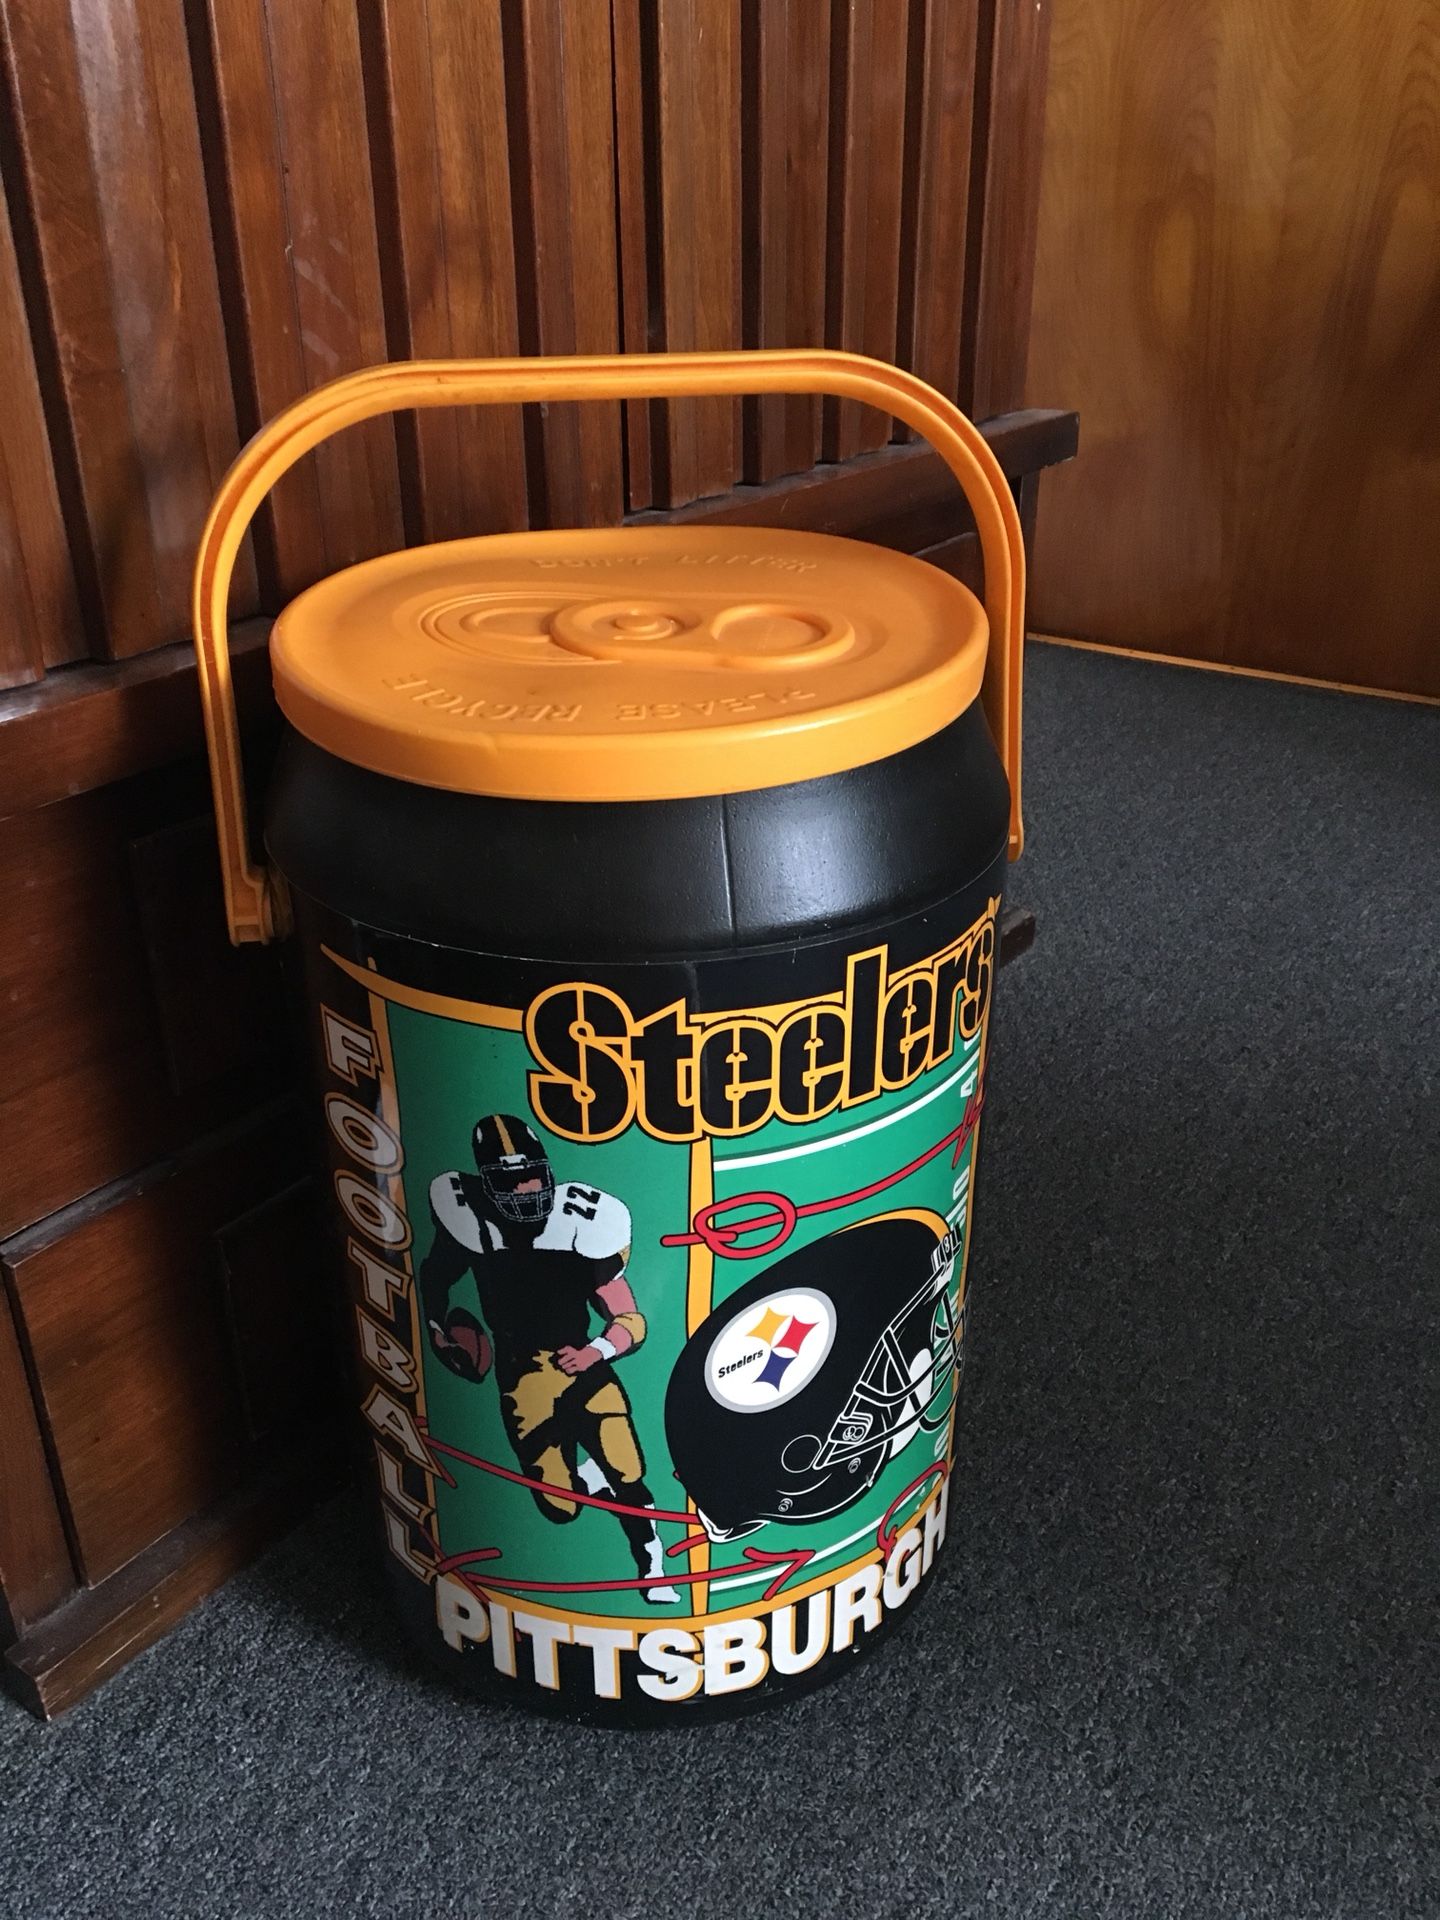 STEELERS BEER COOL! PERFECT FOR TAILGATING!